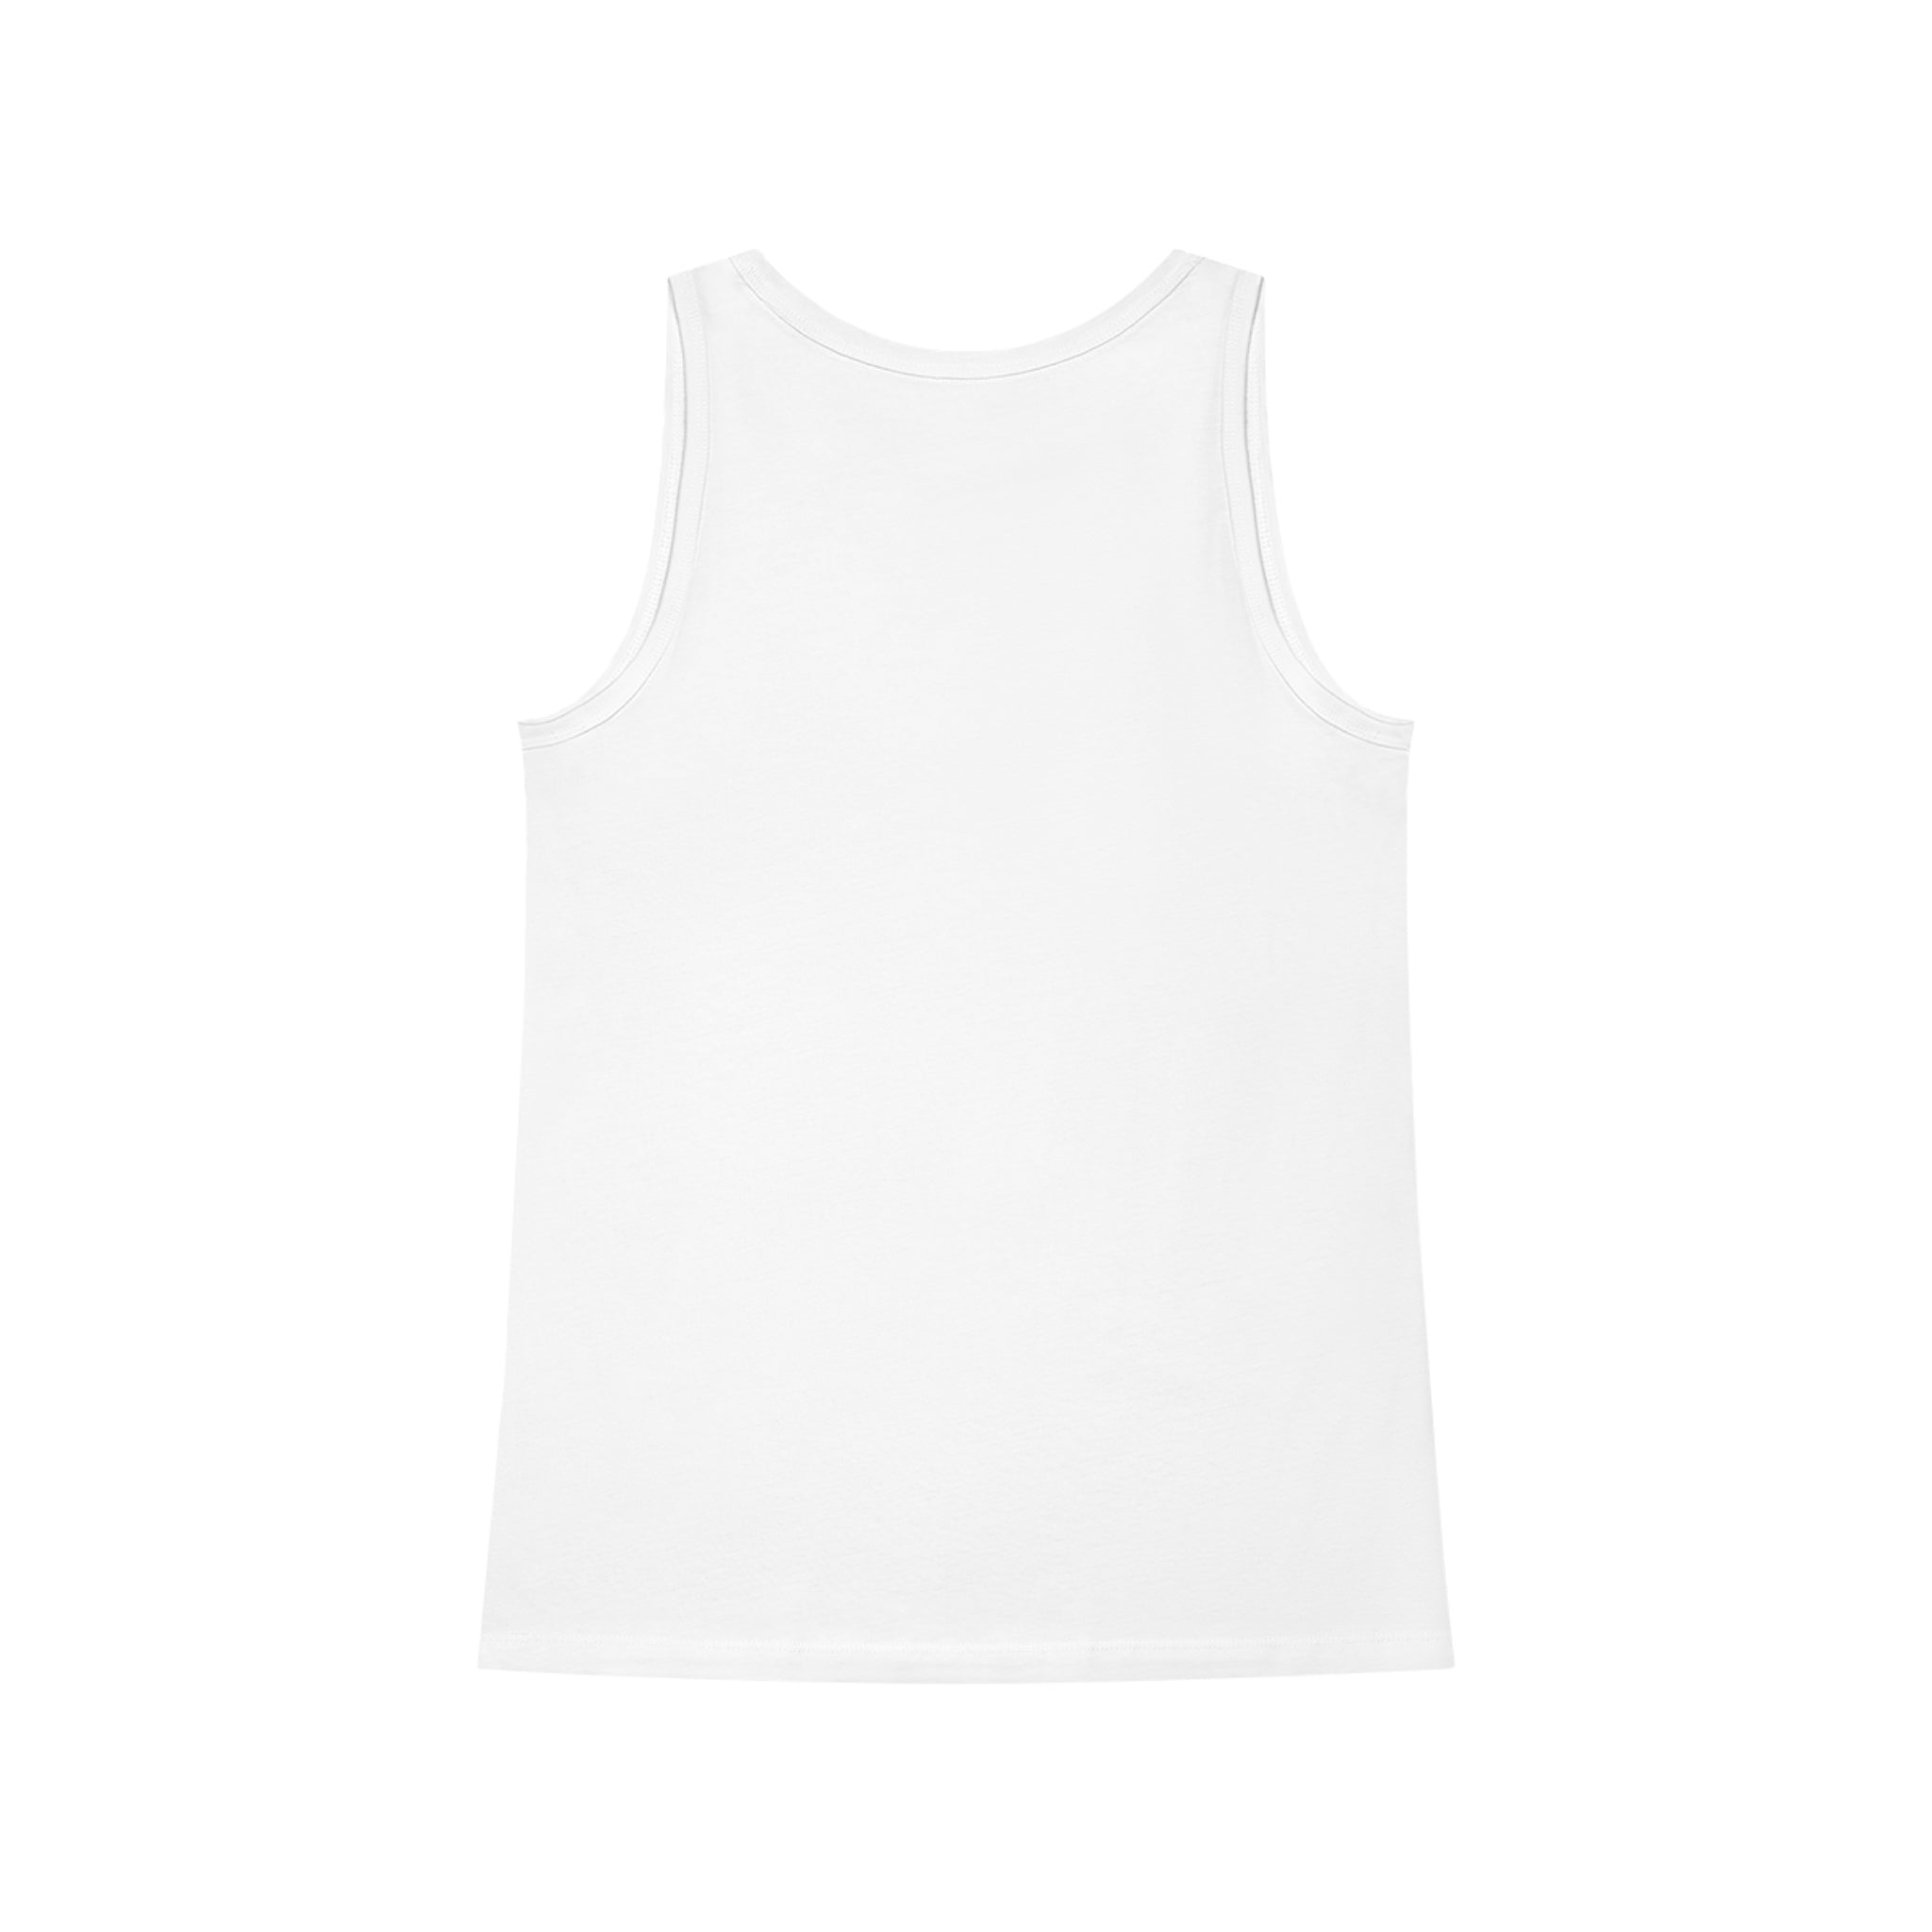 A Flower Boom Tank Top, a white floral print tank top made of organic cotton on a white background.